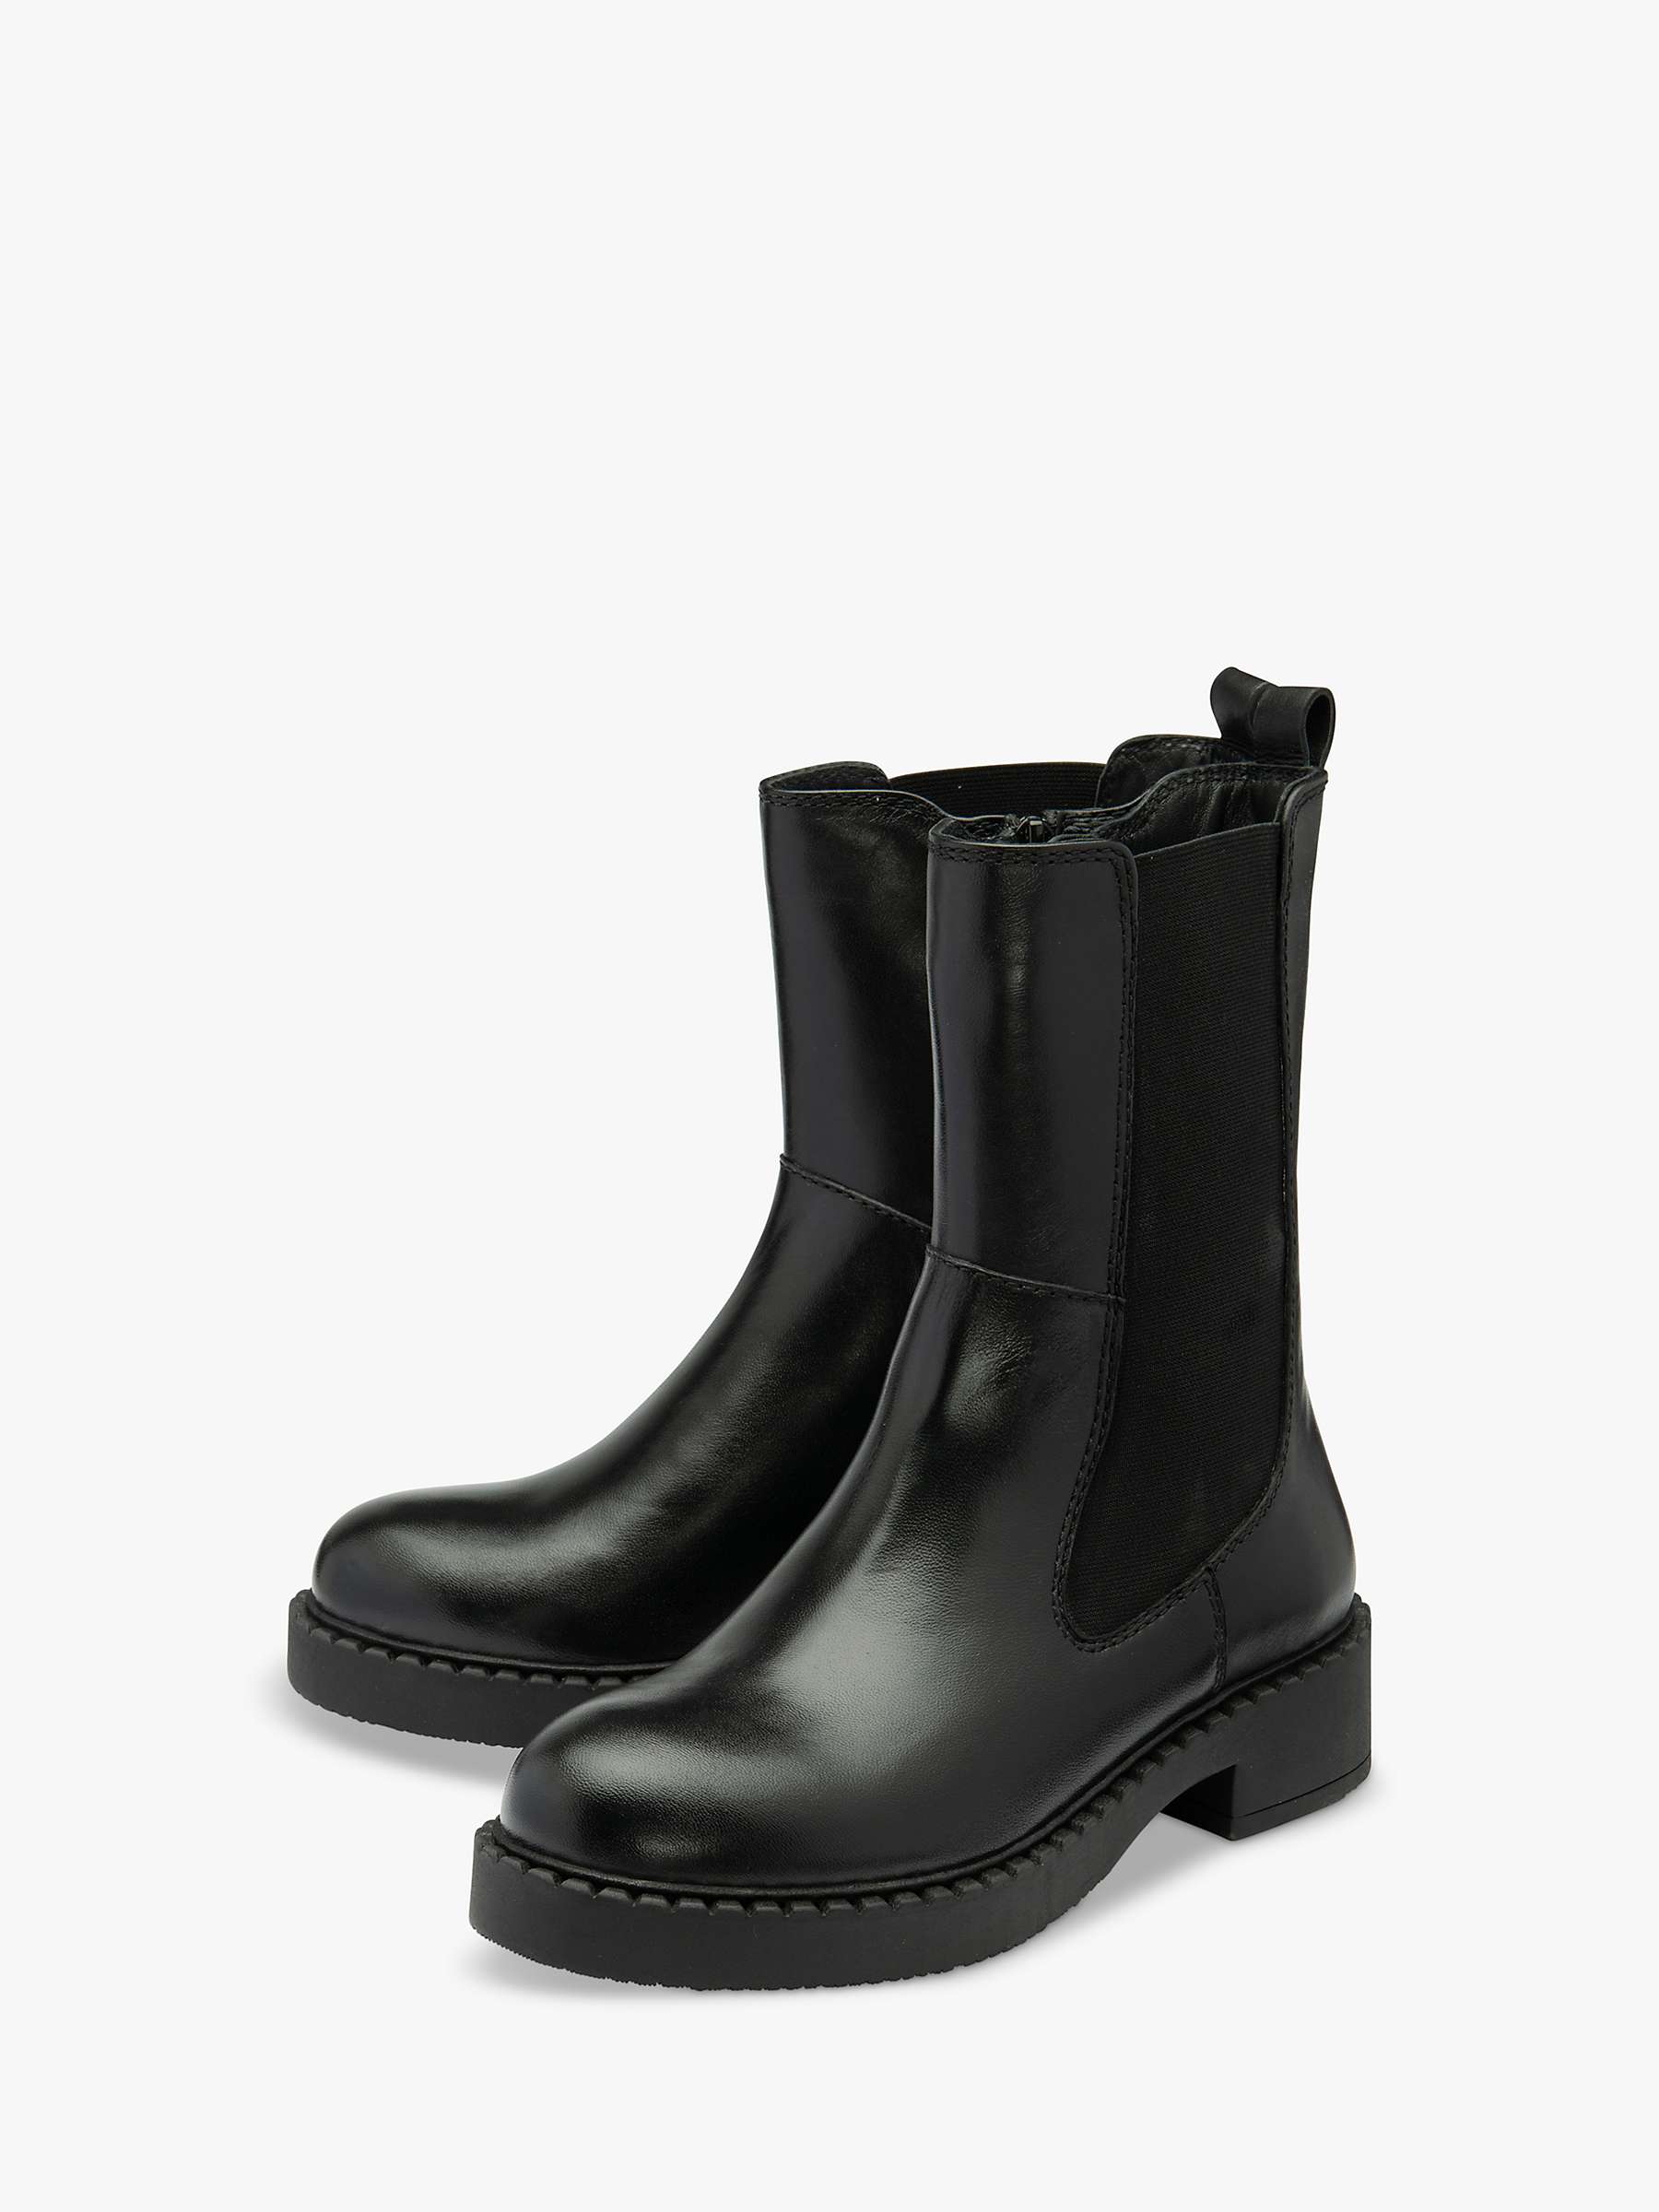 Buy Ravel Garvie Leather Mid-Calf Boots Online at johnlewis.com